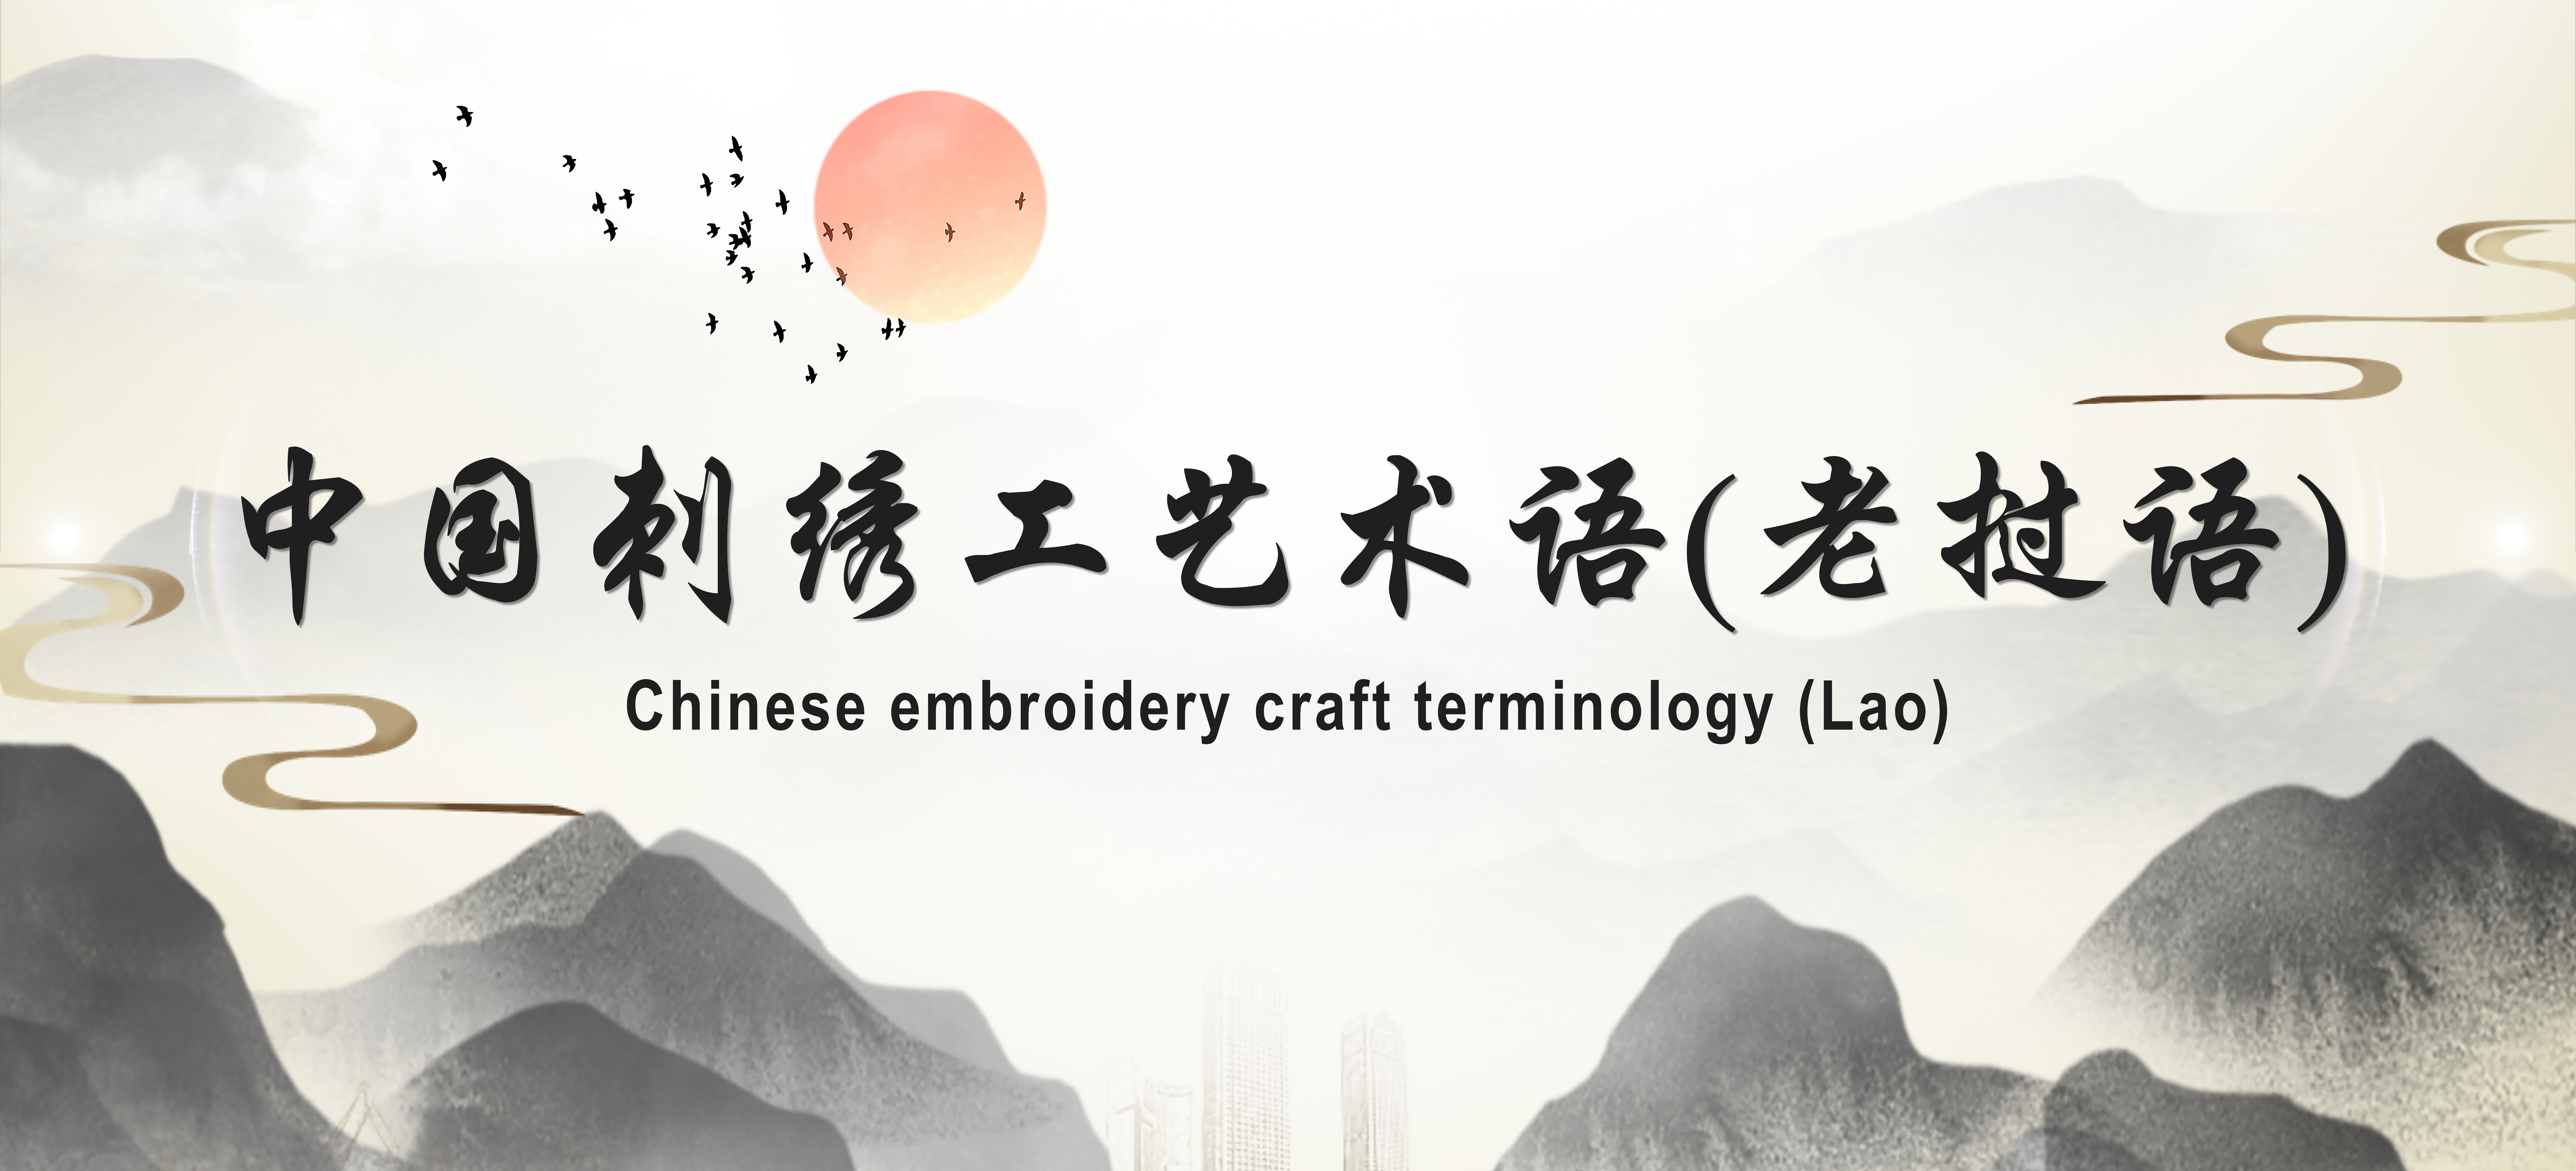 Chinese embroidery craft terminology (Lao)